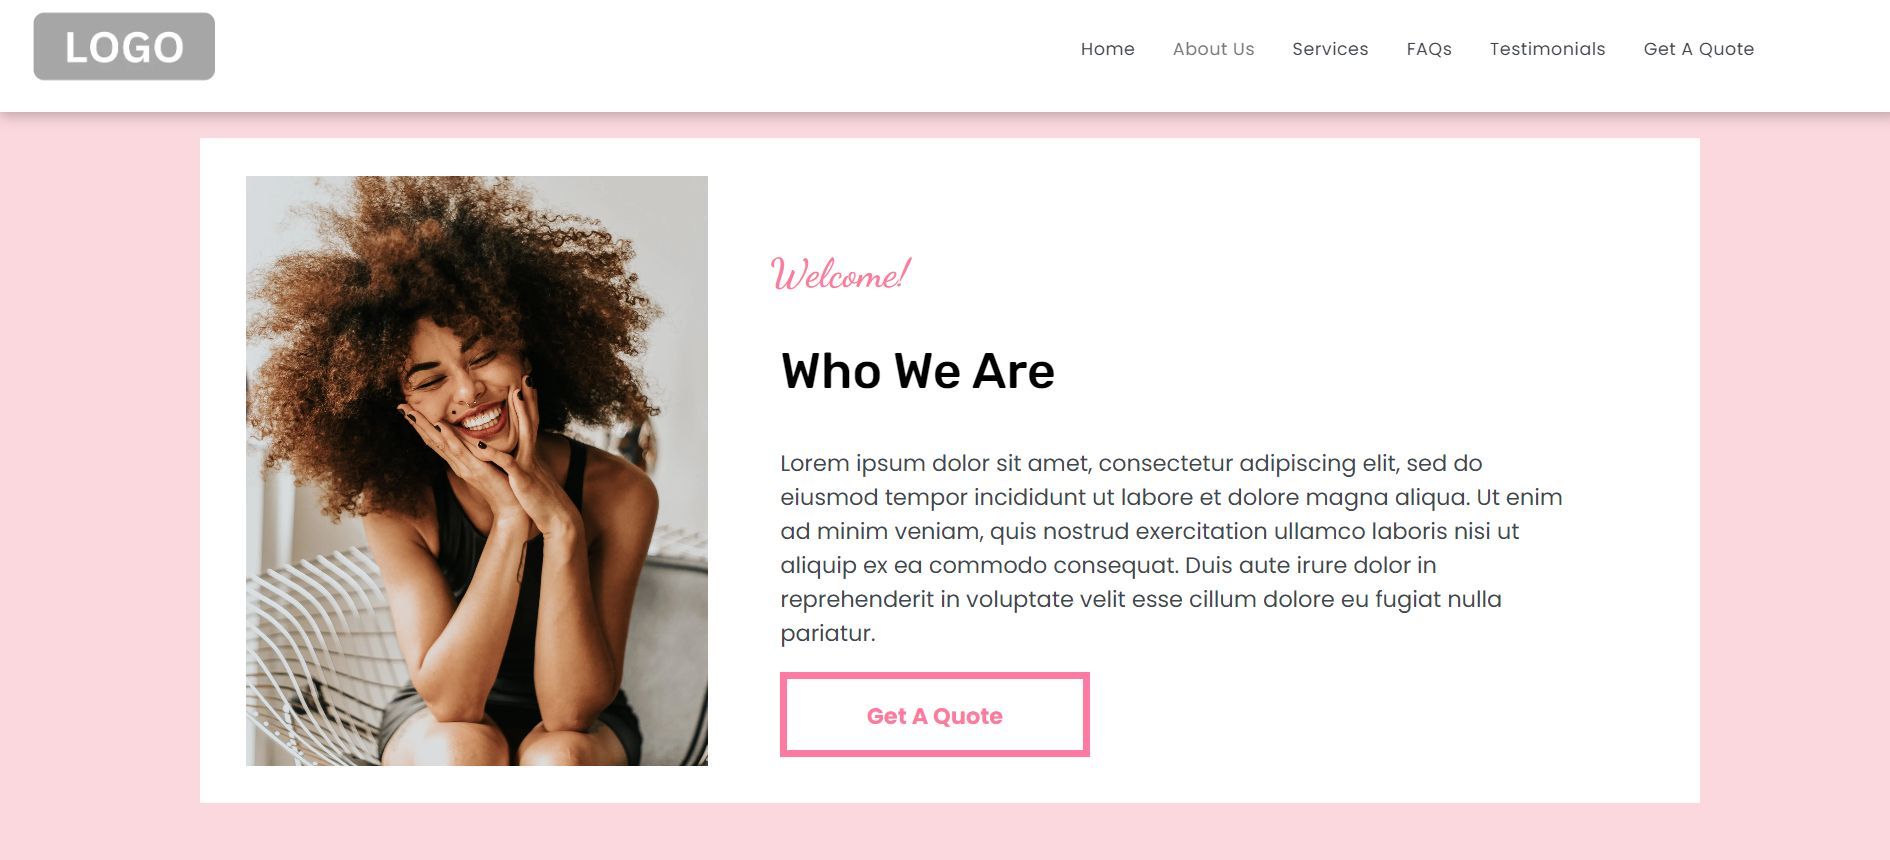 New Website Template - Cotton Candy - Who We Are Section